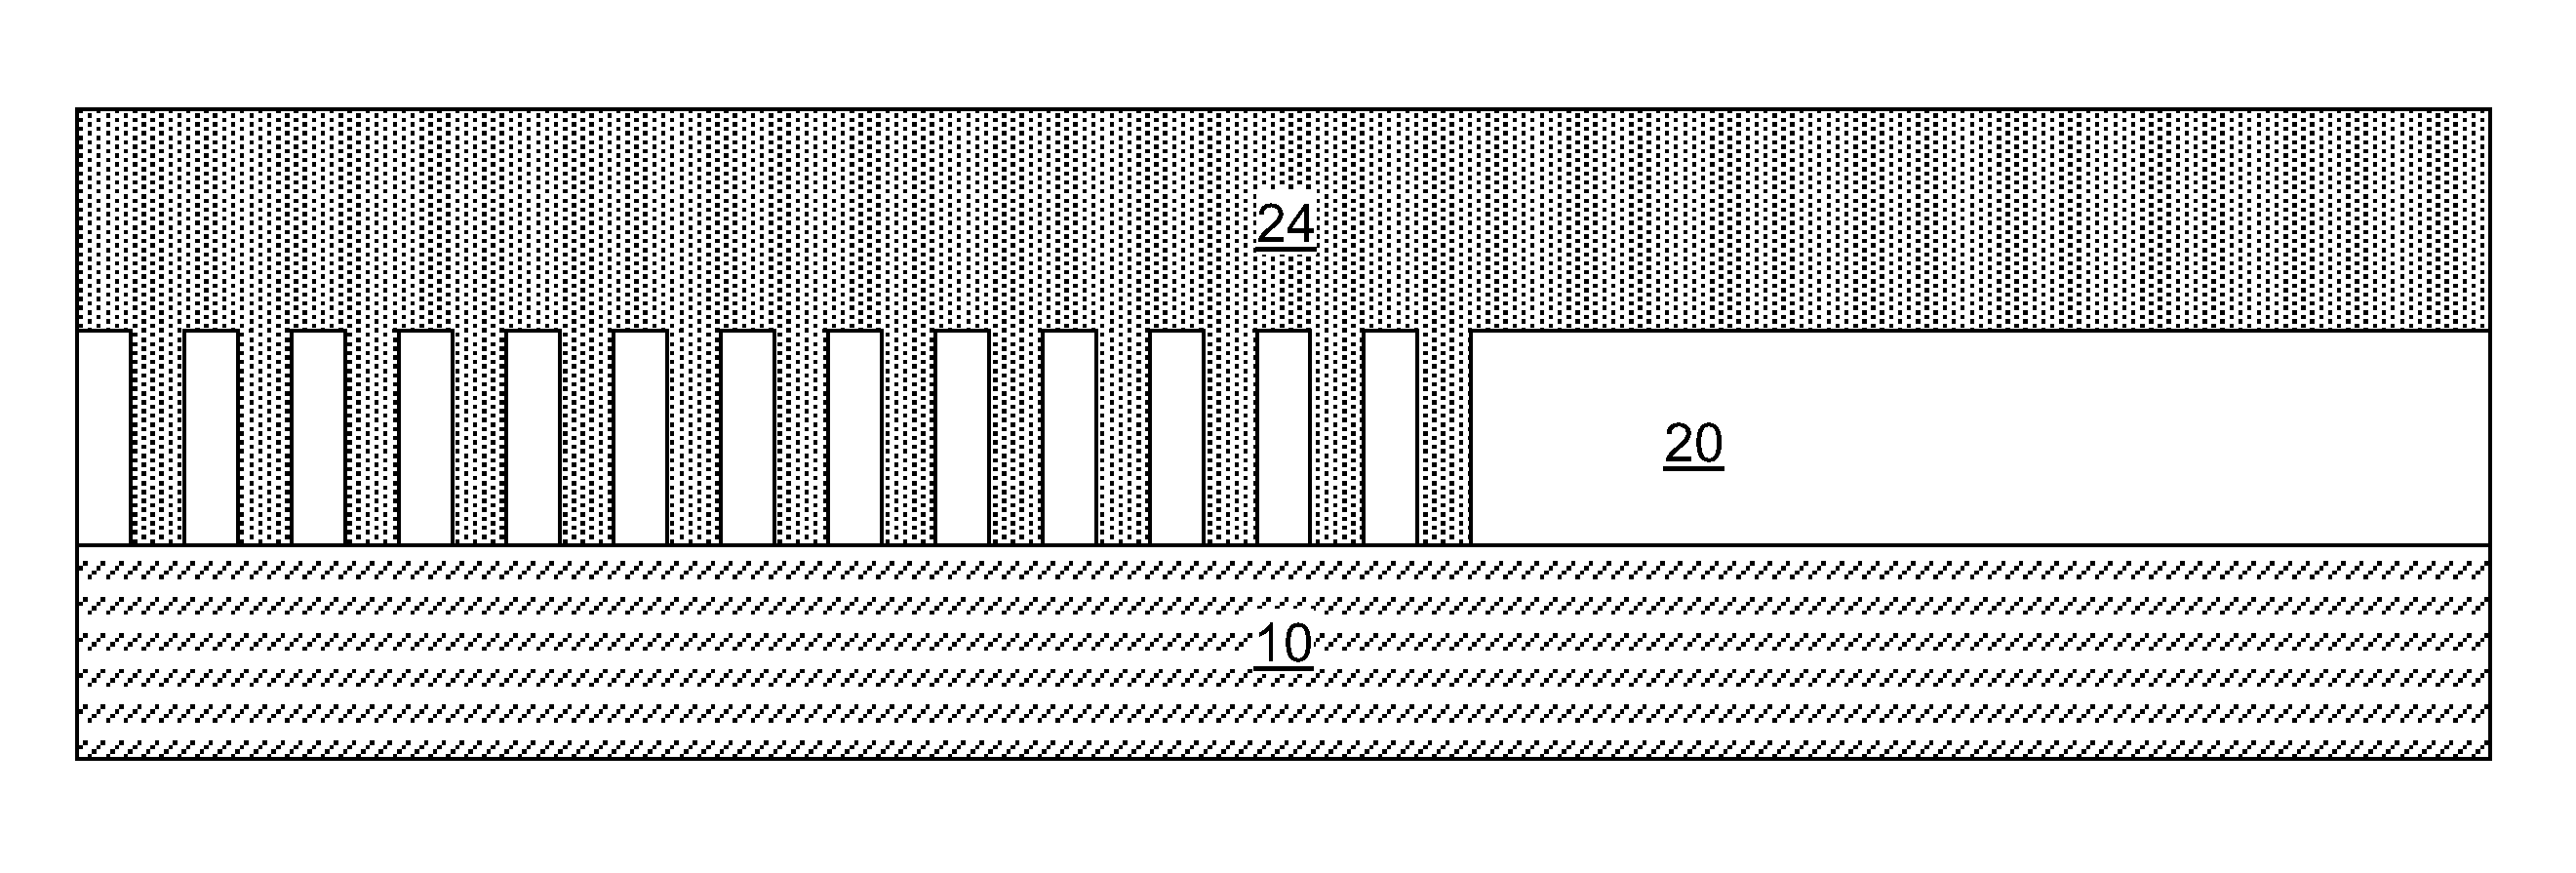 Sidewall image transfer process employing a cap material layer for a metal nitride layer